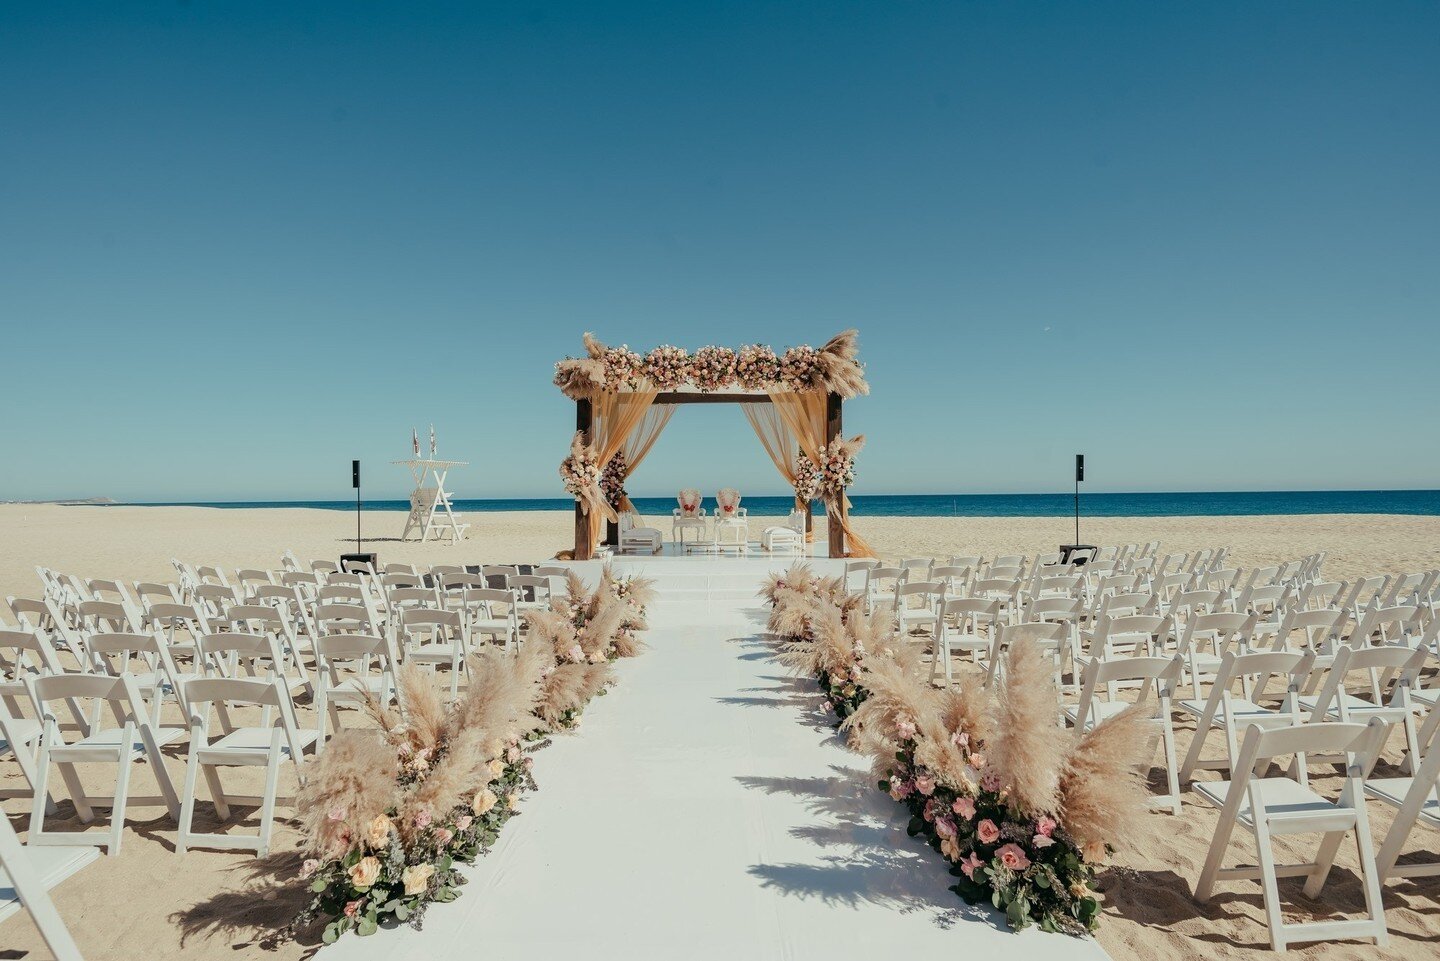 Nothing but clear skies for this beautiful beach wedding! #PartnersinParadise⁠
🇲🇽 @shaadidestinations⁠
🧚 @jccastilloweddings⁠
📸 @sweetcaribbeanphoto☝️⁠
📽️ @ruiz.films⁠
💄 @stylingtrio⁠
🎪 @zunigadecocancun⁠
🎪 @delcaboevents⁠
💮 @roses.andco⁠
🎧